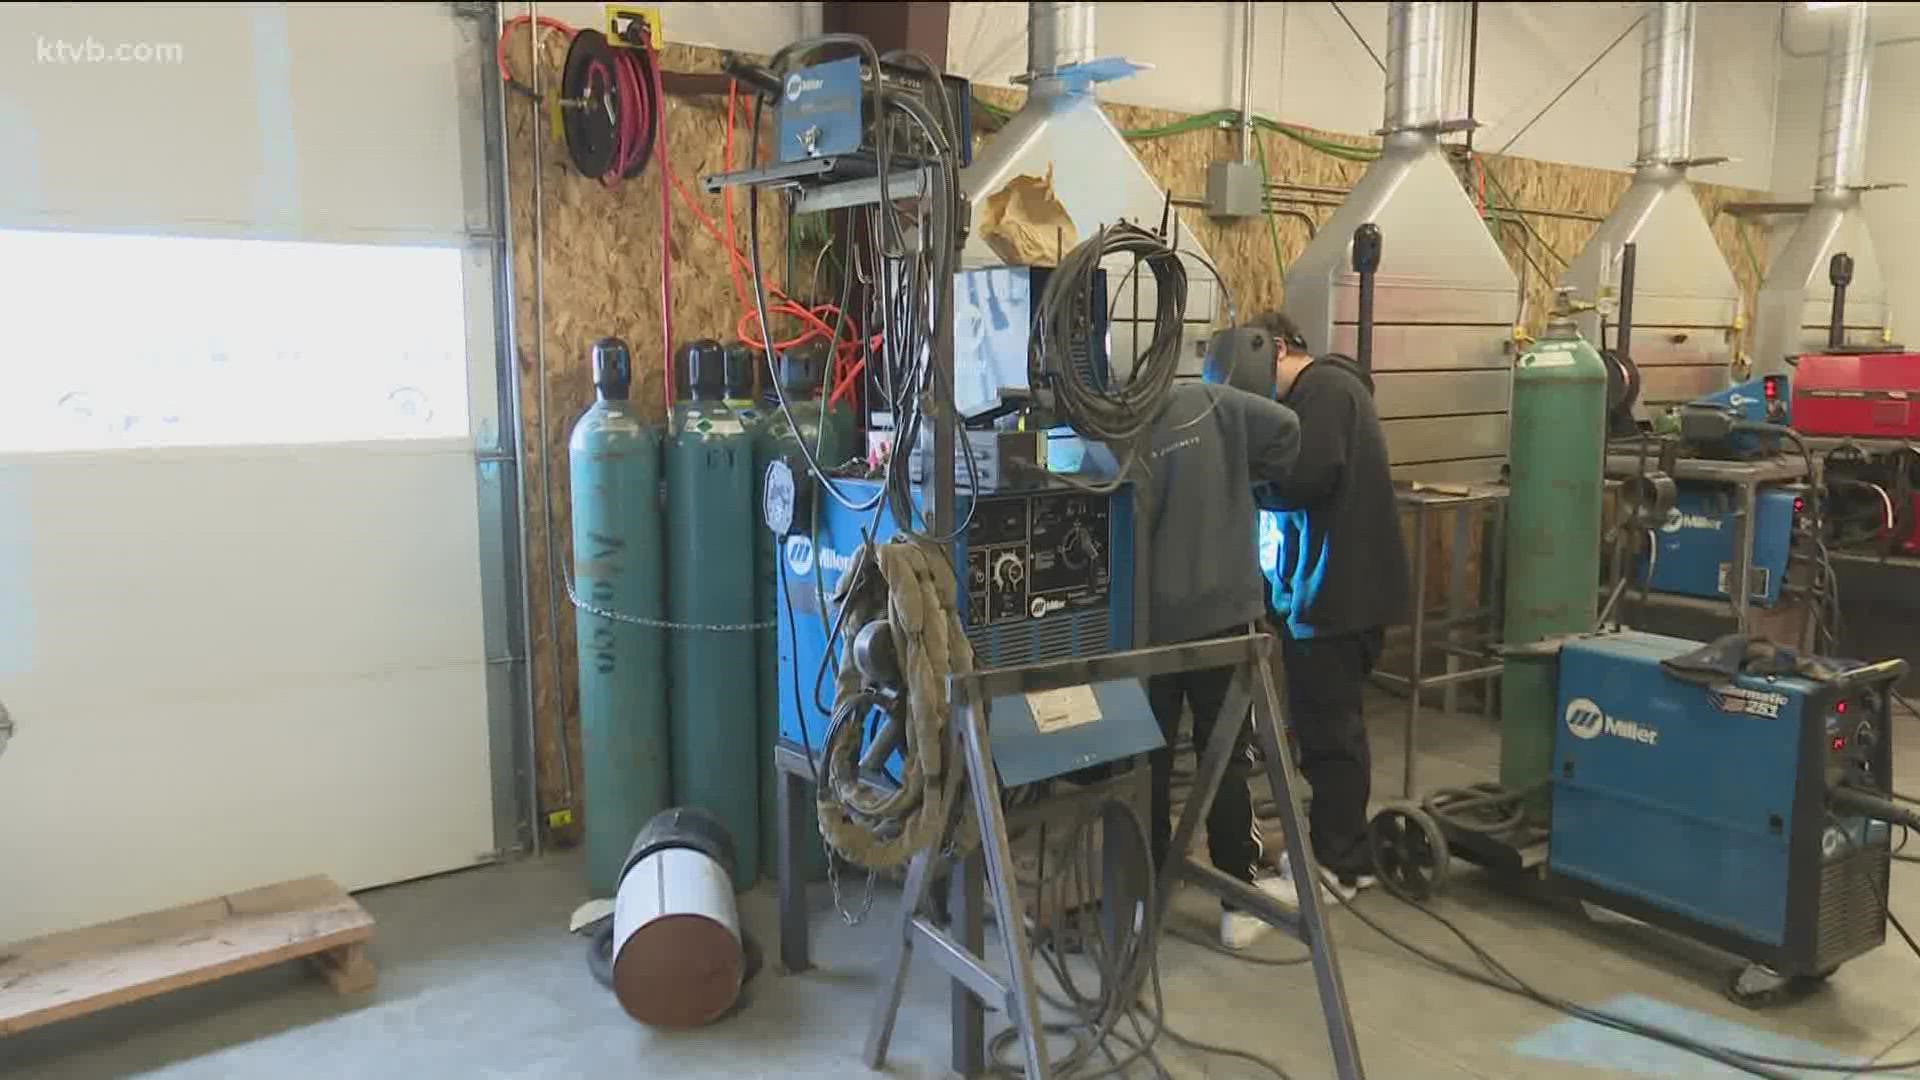 Local businesses said a partnership to help close the gap of skilled workers versus demand.